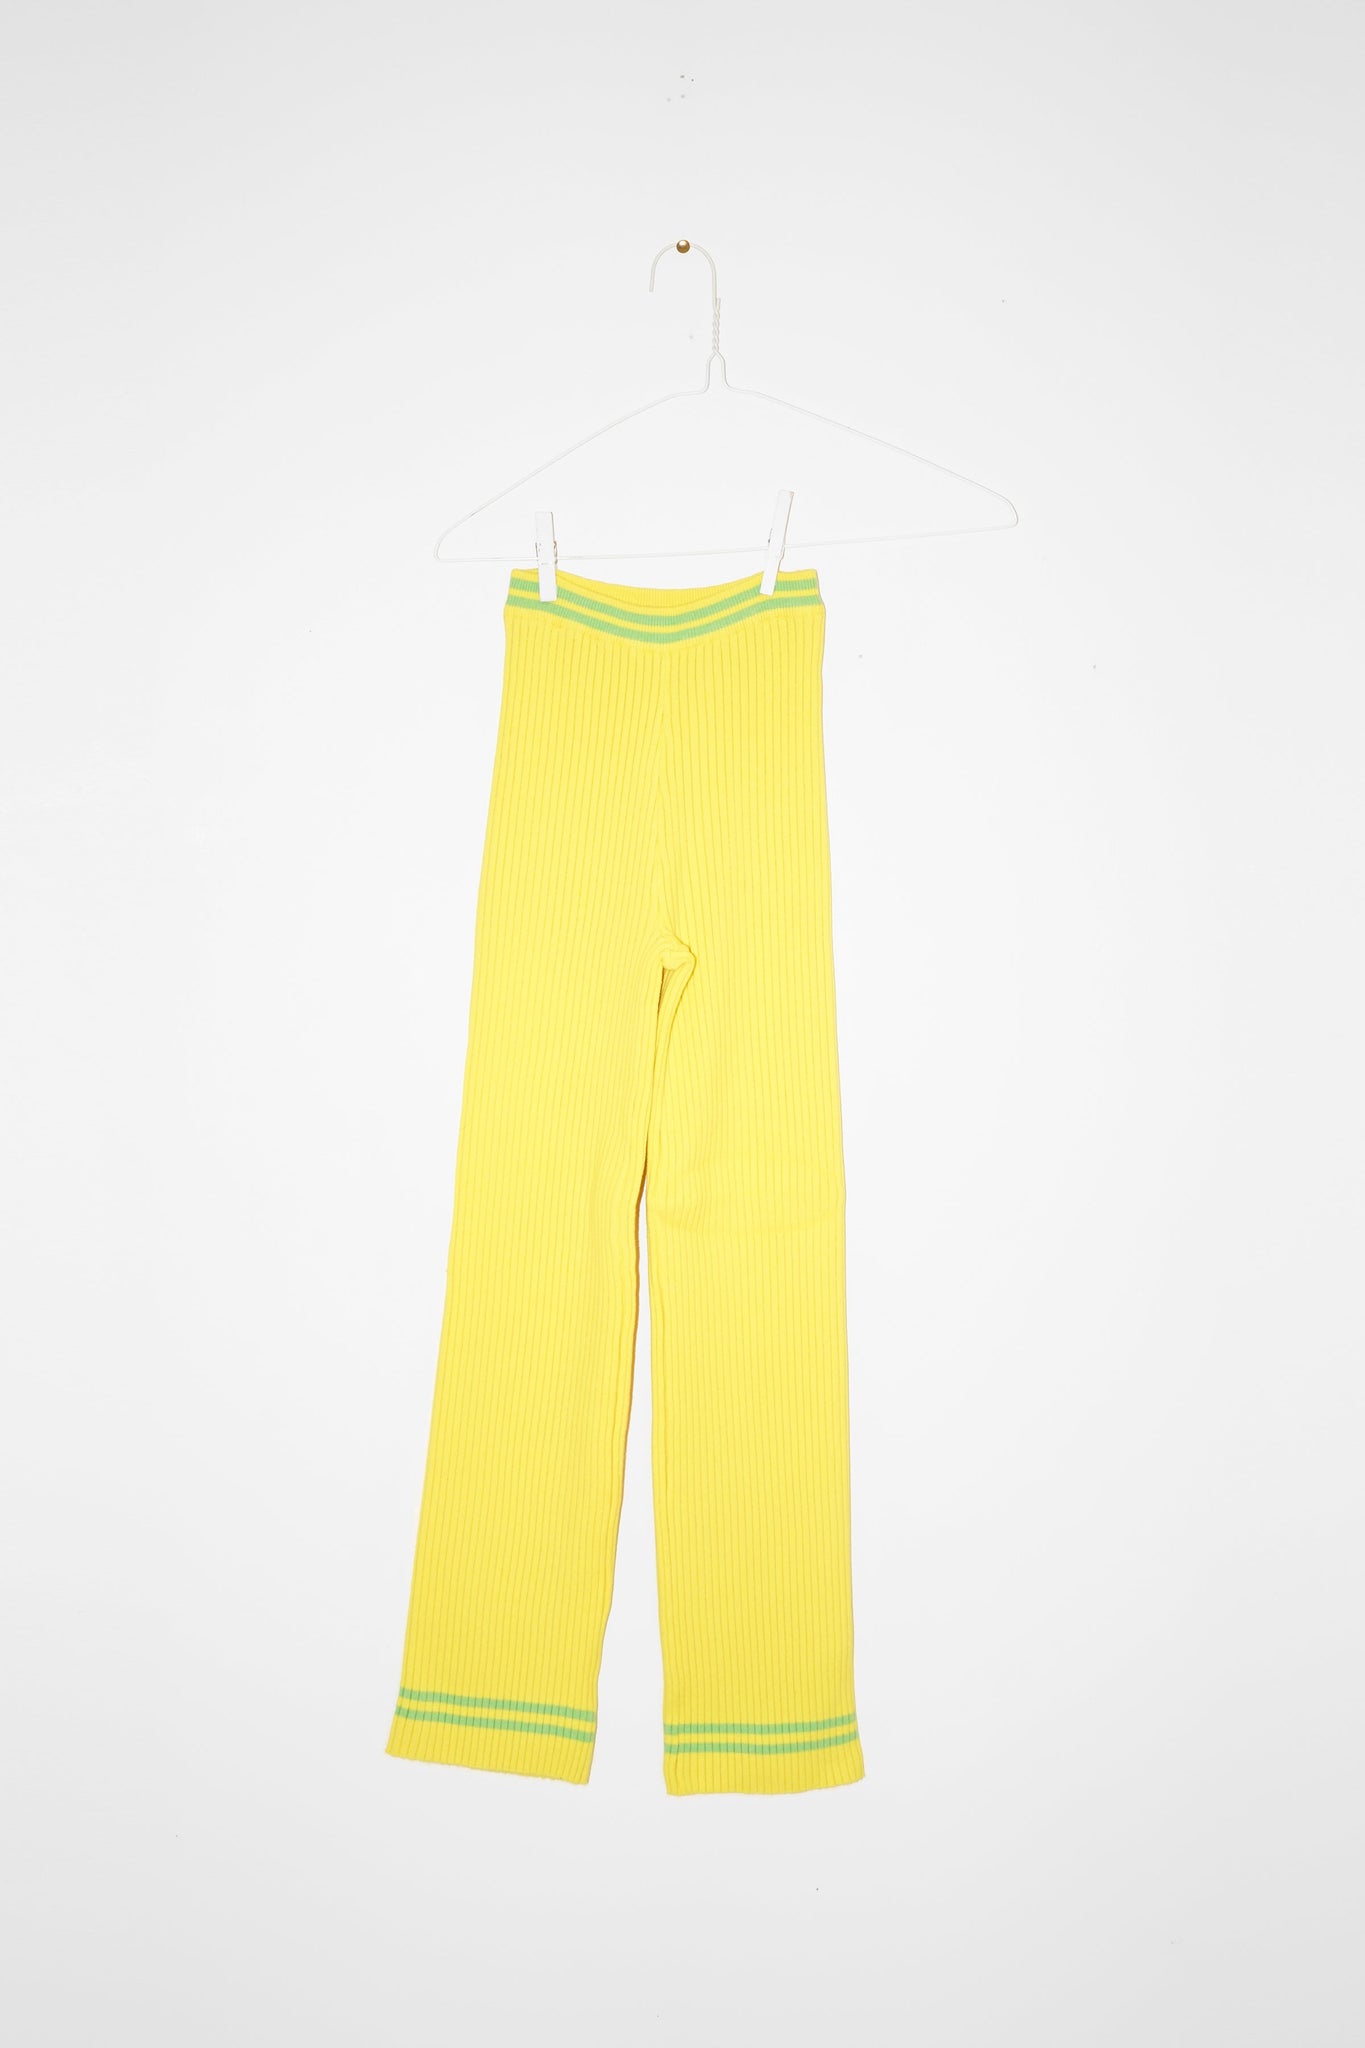 NONNA Pants in Zing ! + Celery SS23